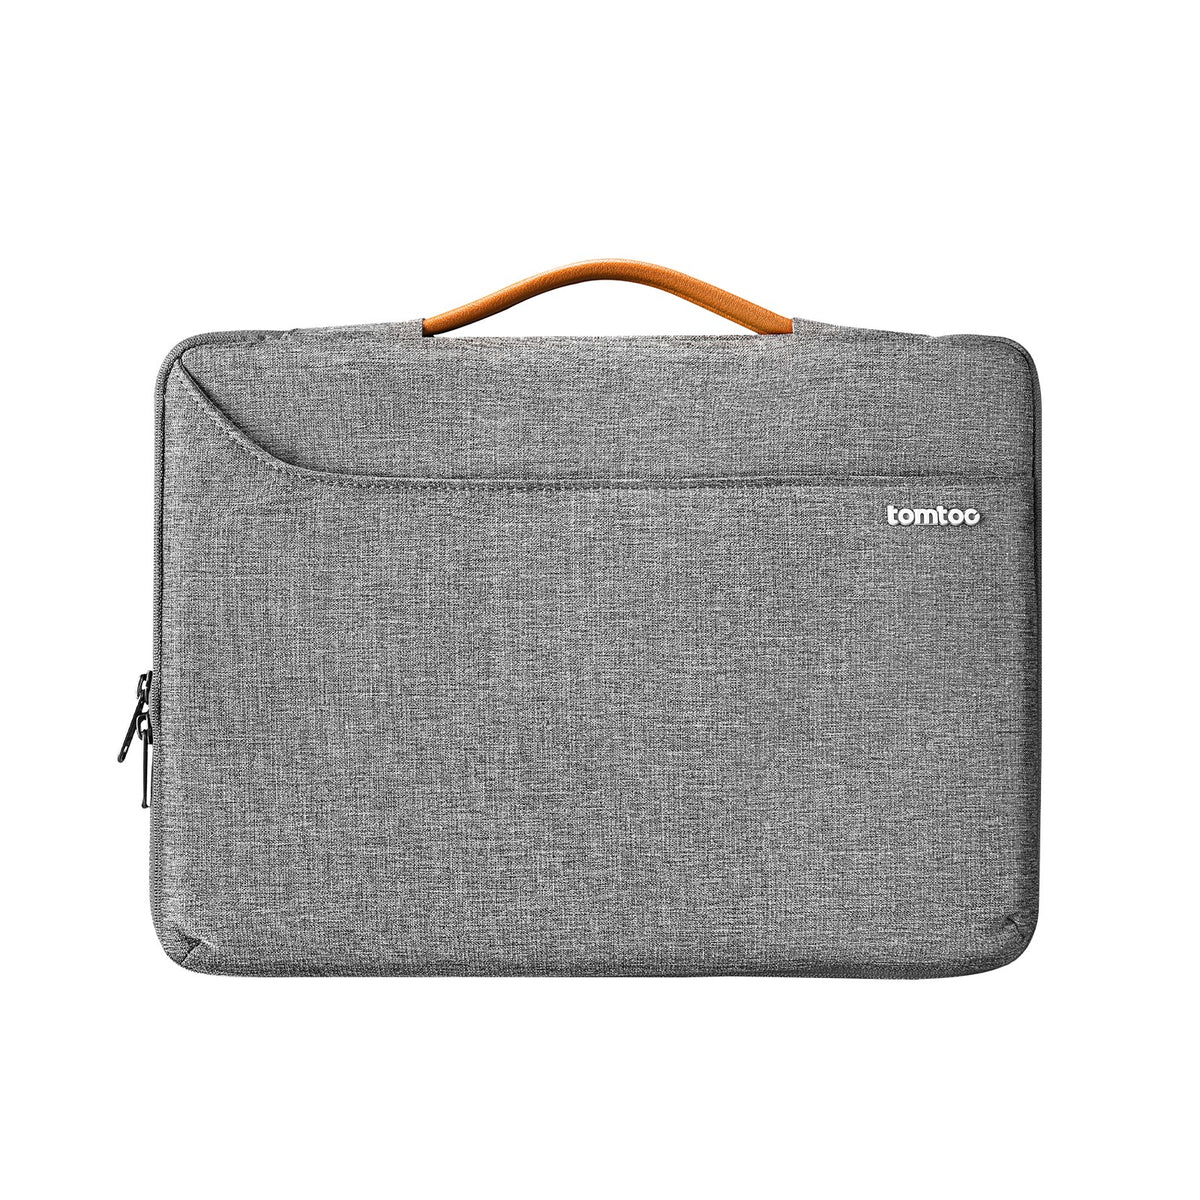 primary_Defender-A22 Laptop Briefcase For 15.6-inch Universal Laptop | Gray